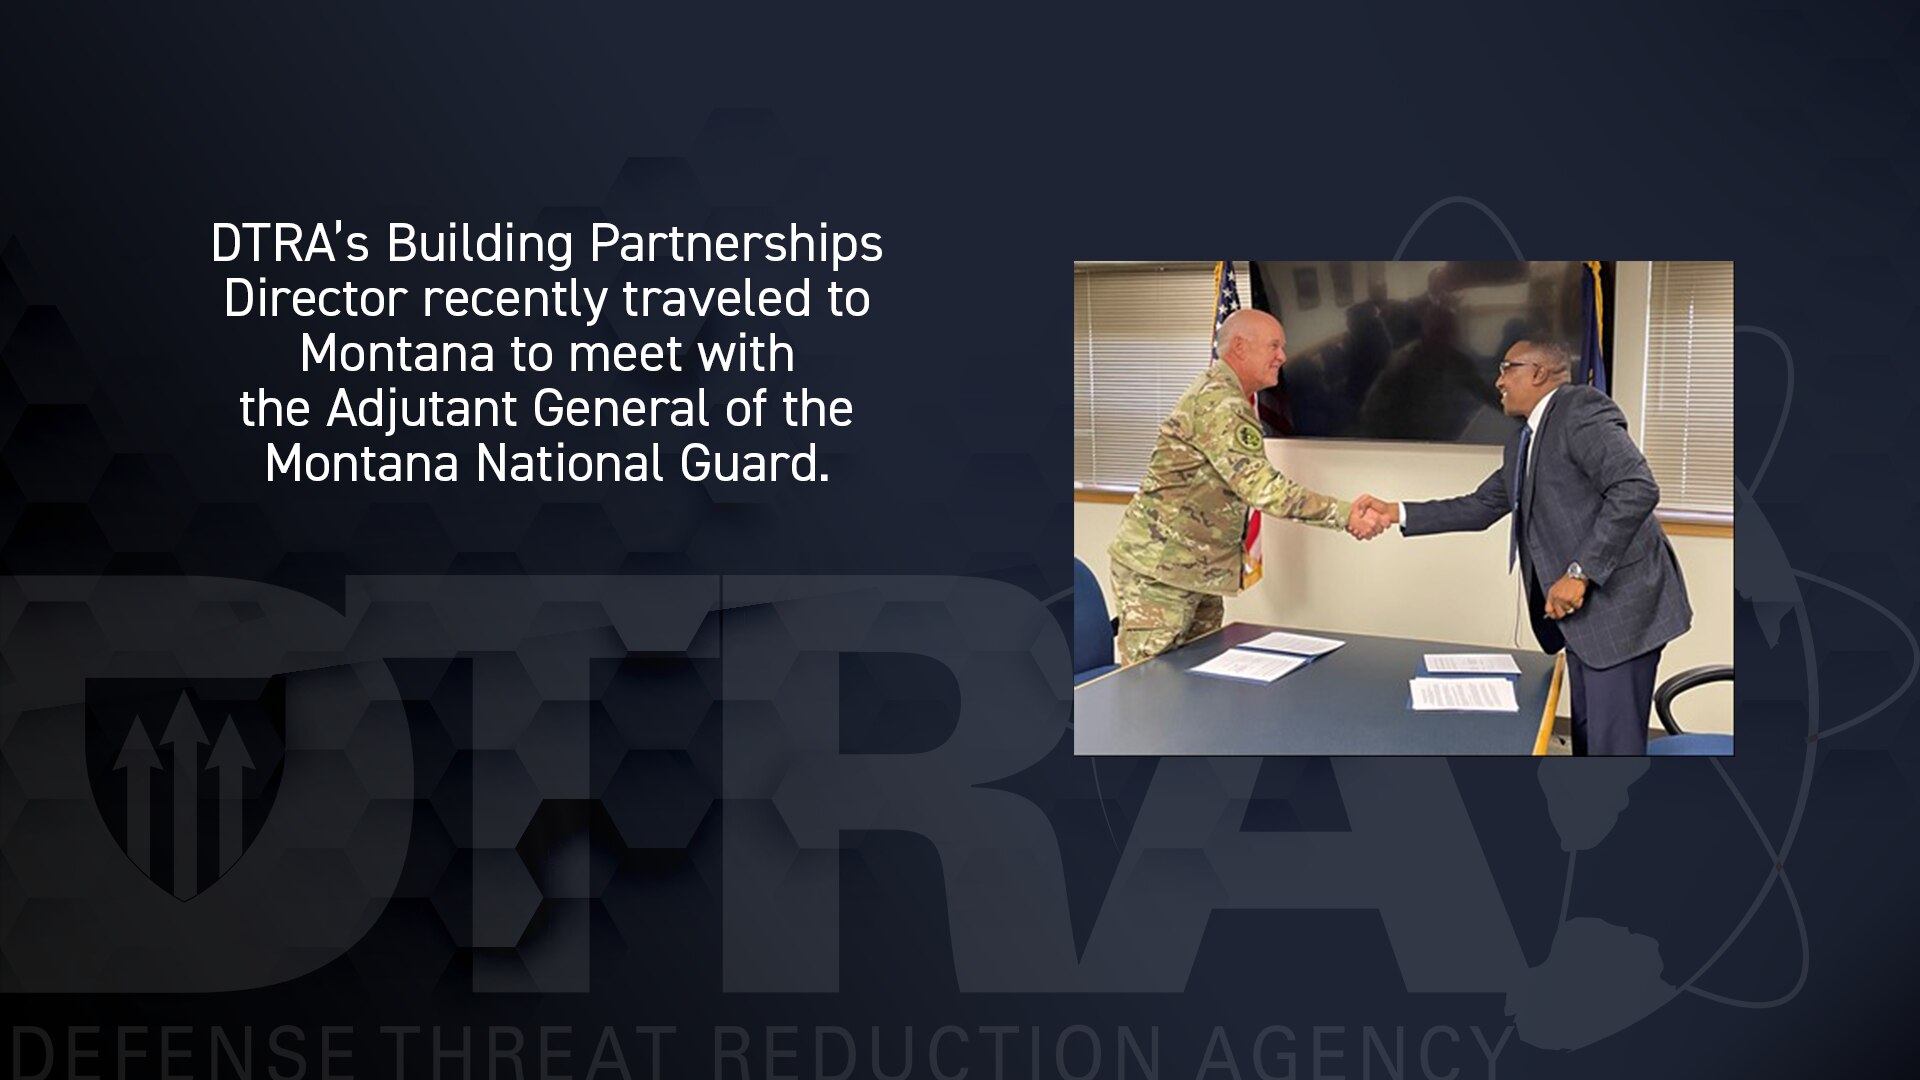 DTRA’s Building Partnerships Director recently traveled to Montana to meet with The Adjutant General of the Montana National Guard.  The purpose of this trip was to build on DTRA’s relationships with the Montana National Guard (MTNG).